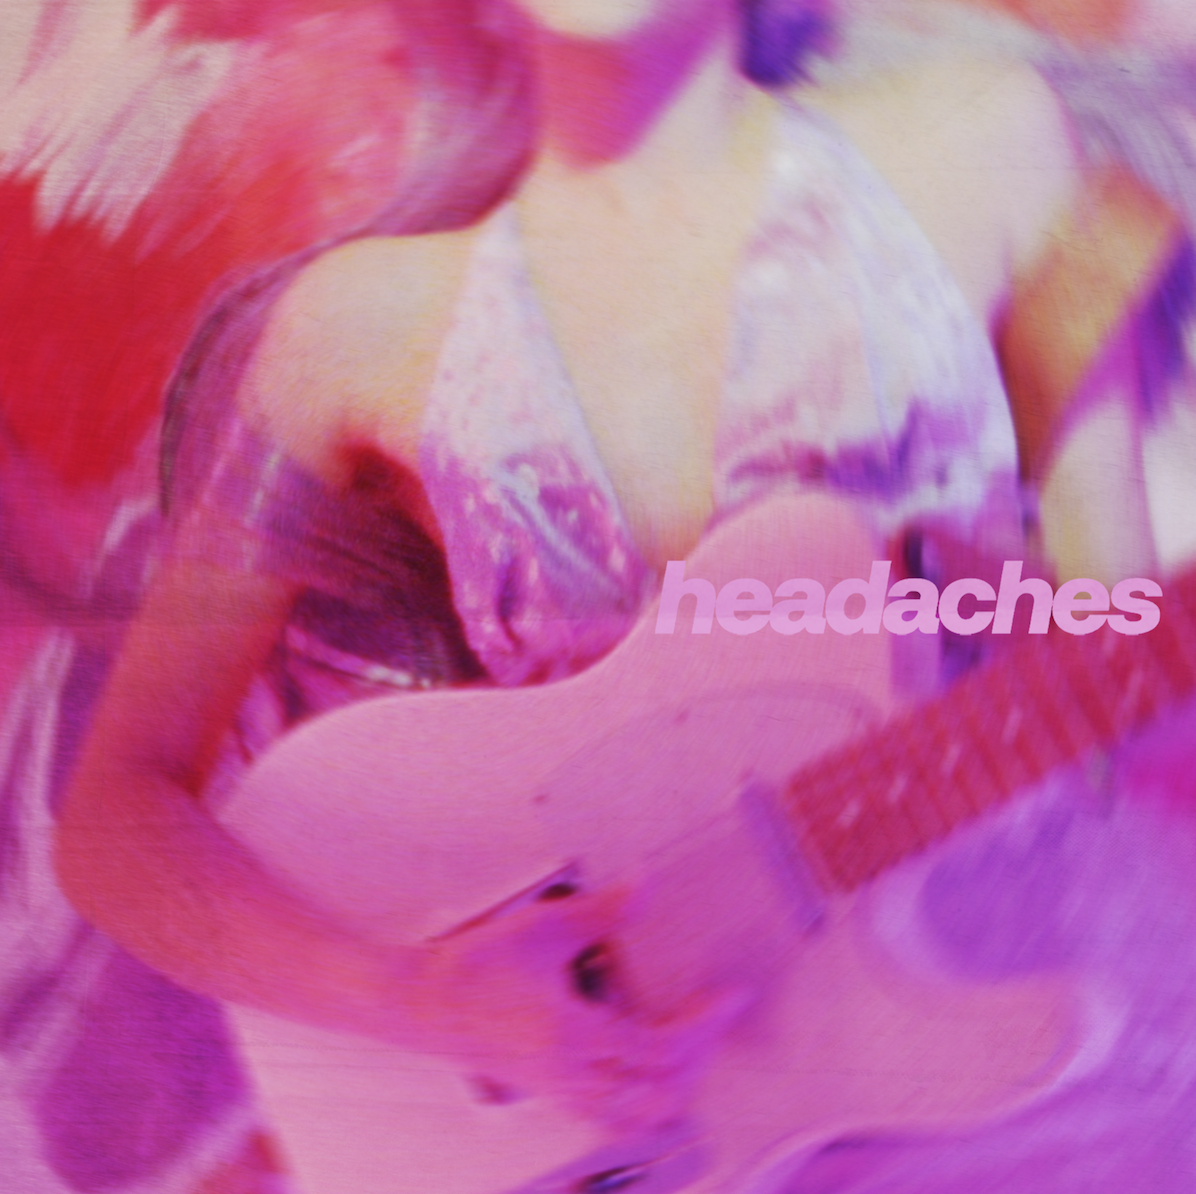 Raveena has released a new song and video "Headaches." The singer/songwriter describes the song, as about "the dizziness that comes with being in love."